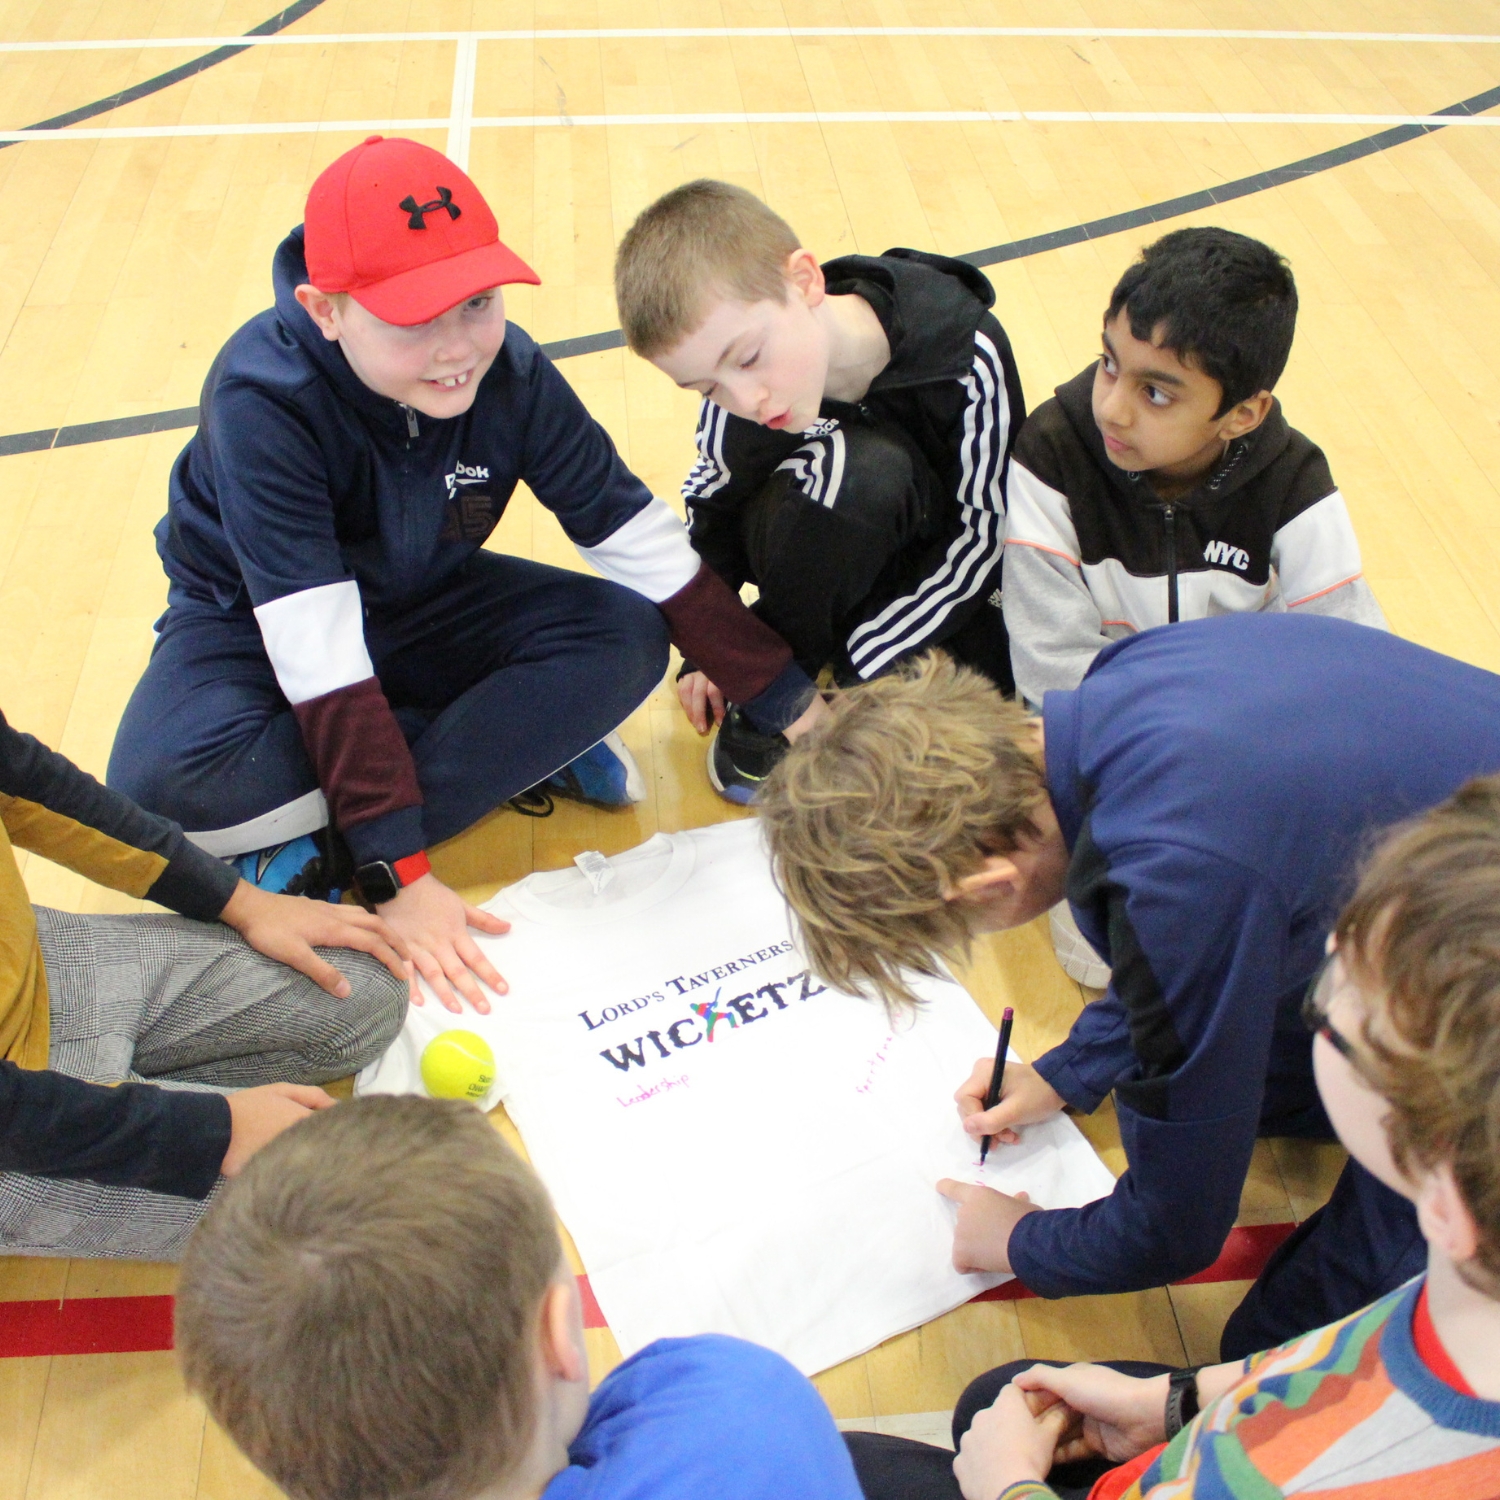 a group of boys designing a Wicketz t-shirt with their team values